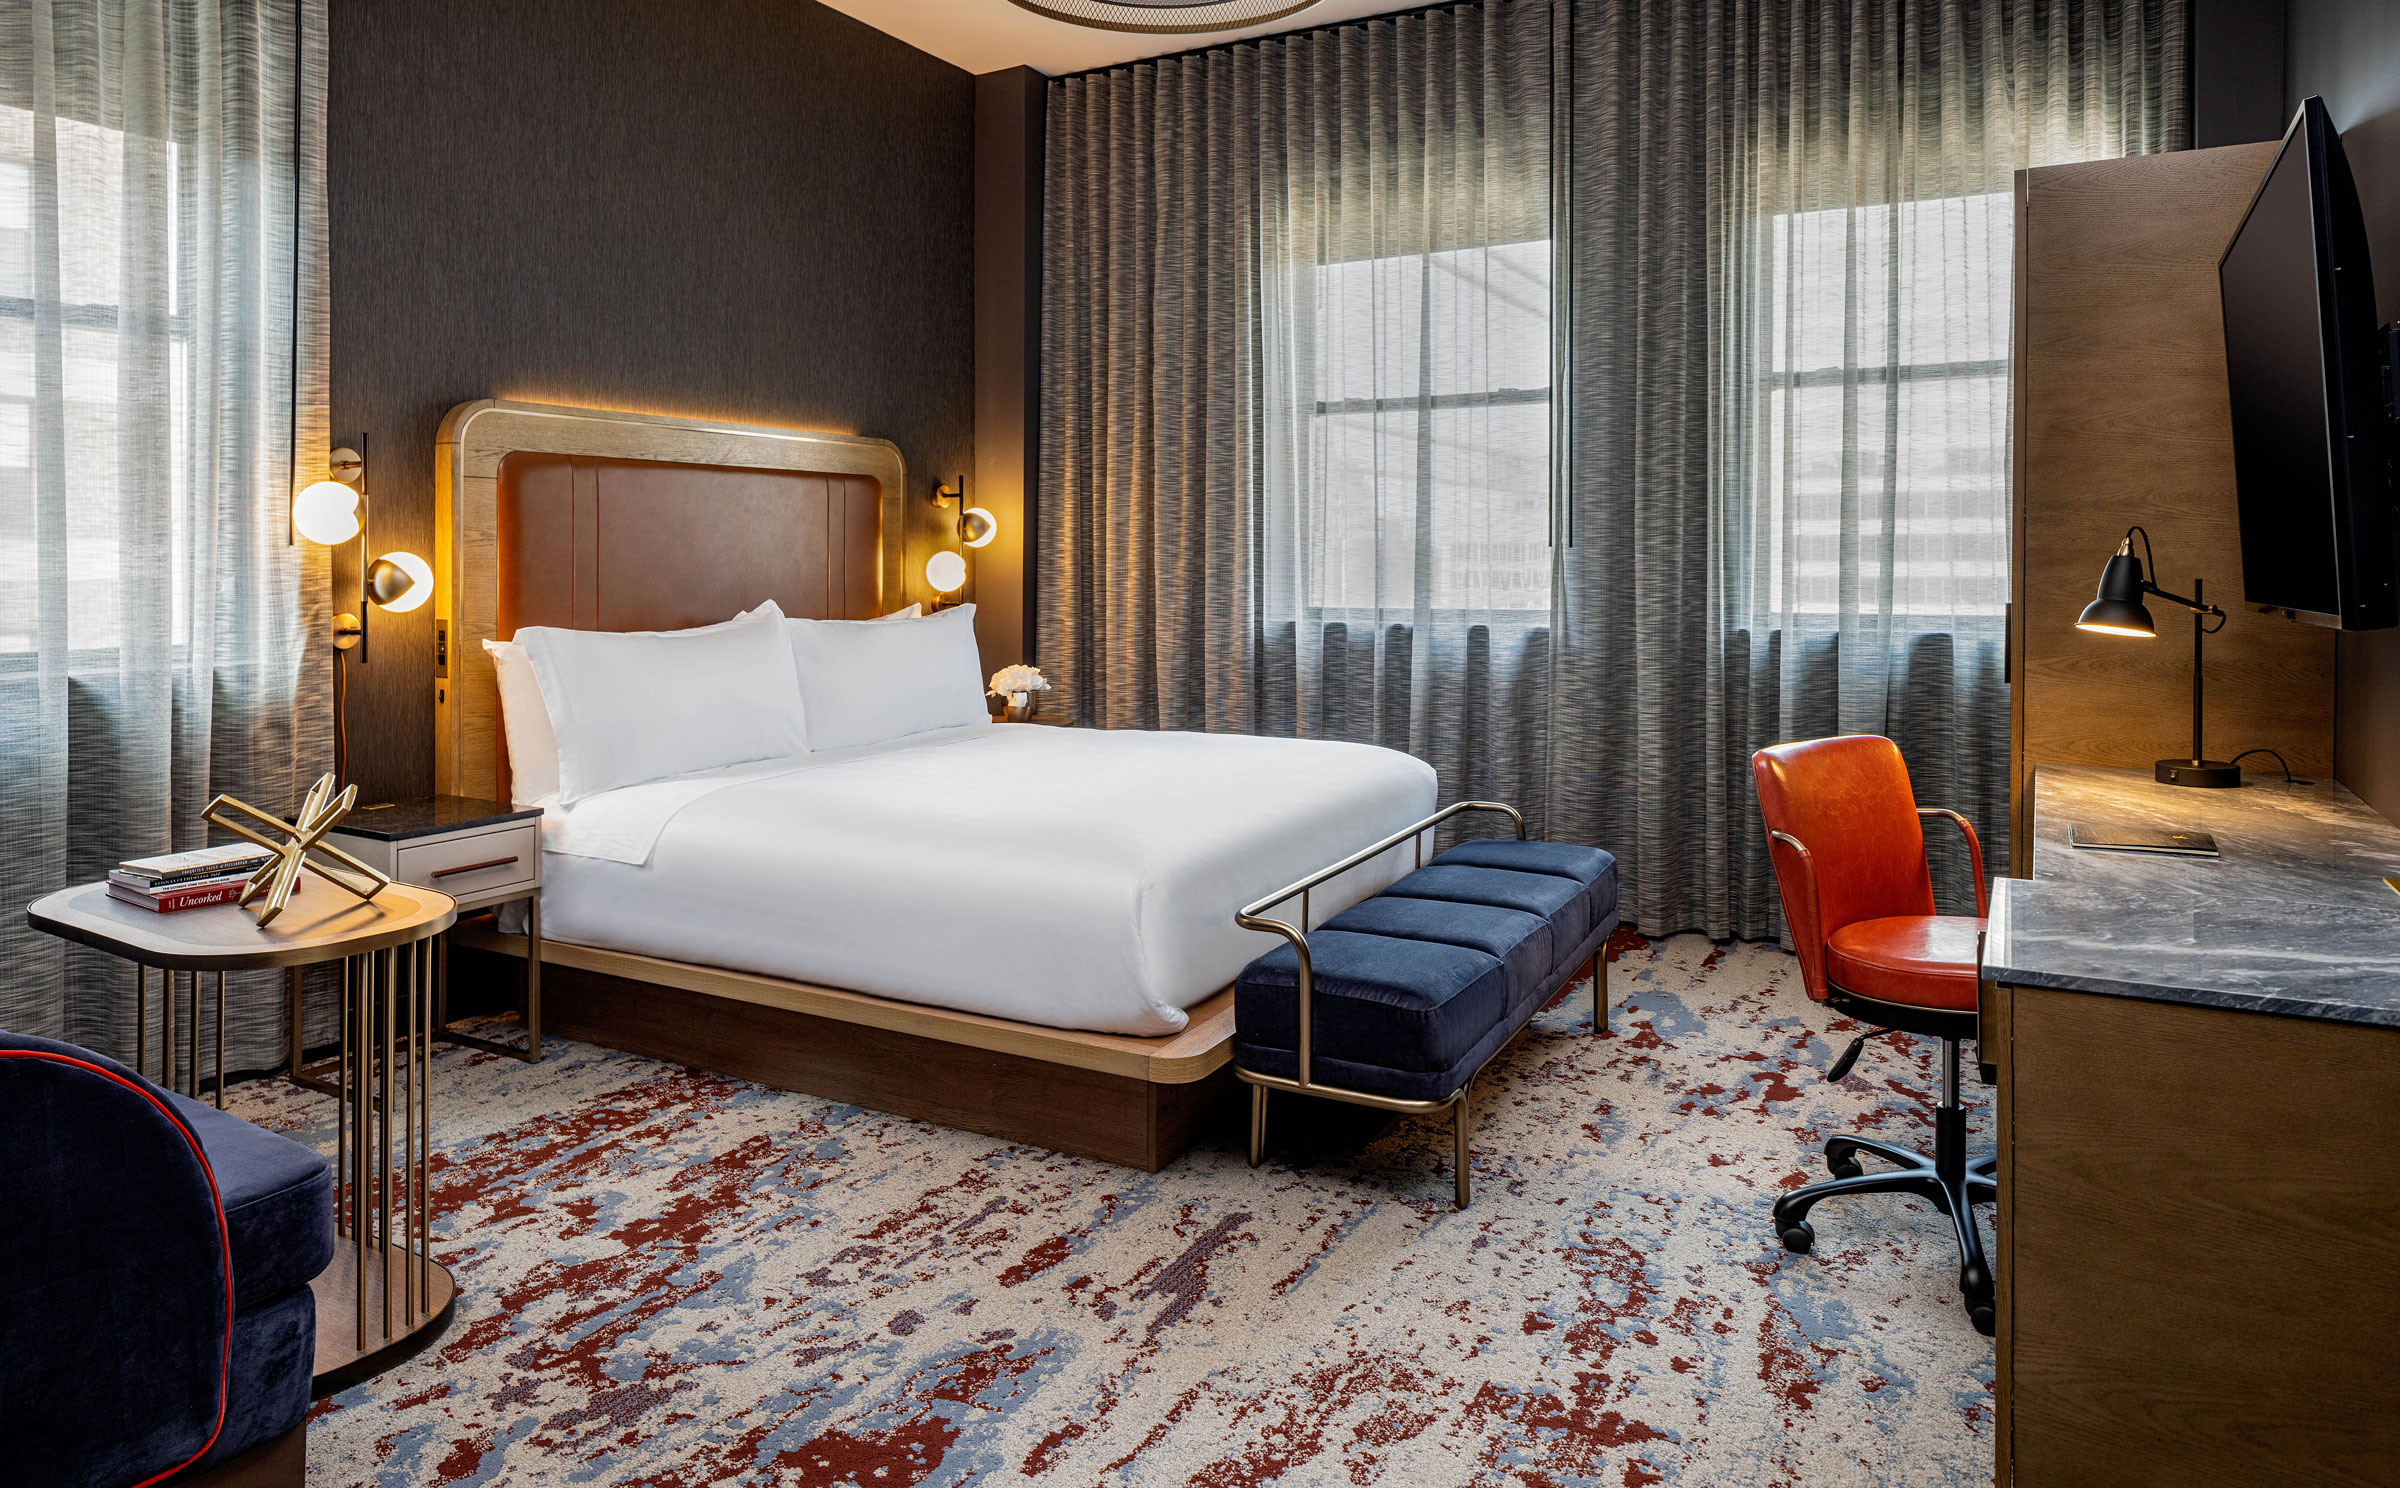 The Industrialist Hotel Design Celebrates Pittsburgh’s Past with Color and Mood